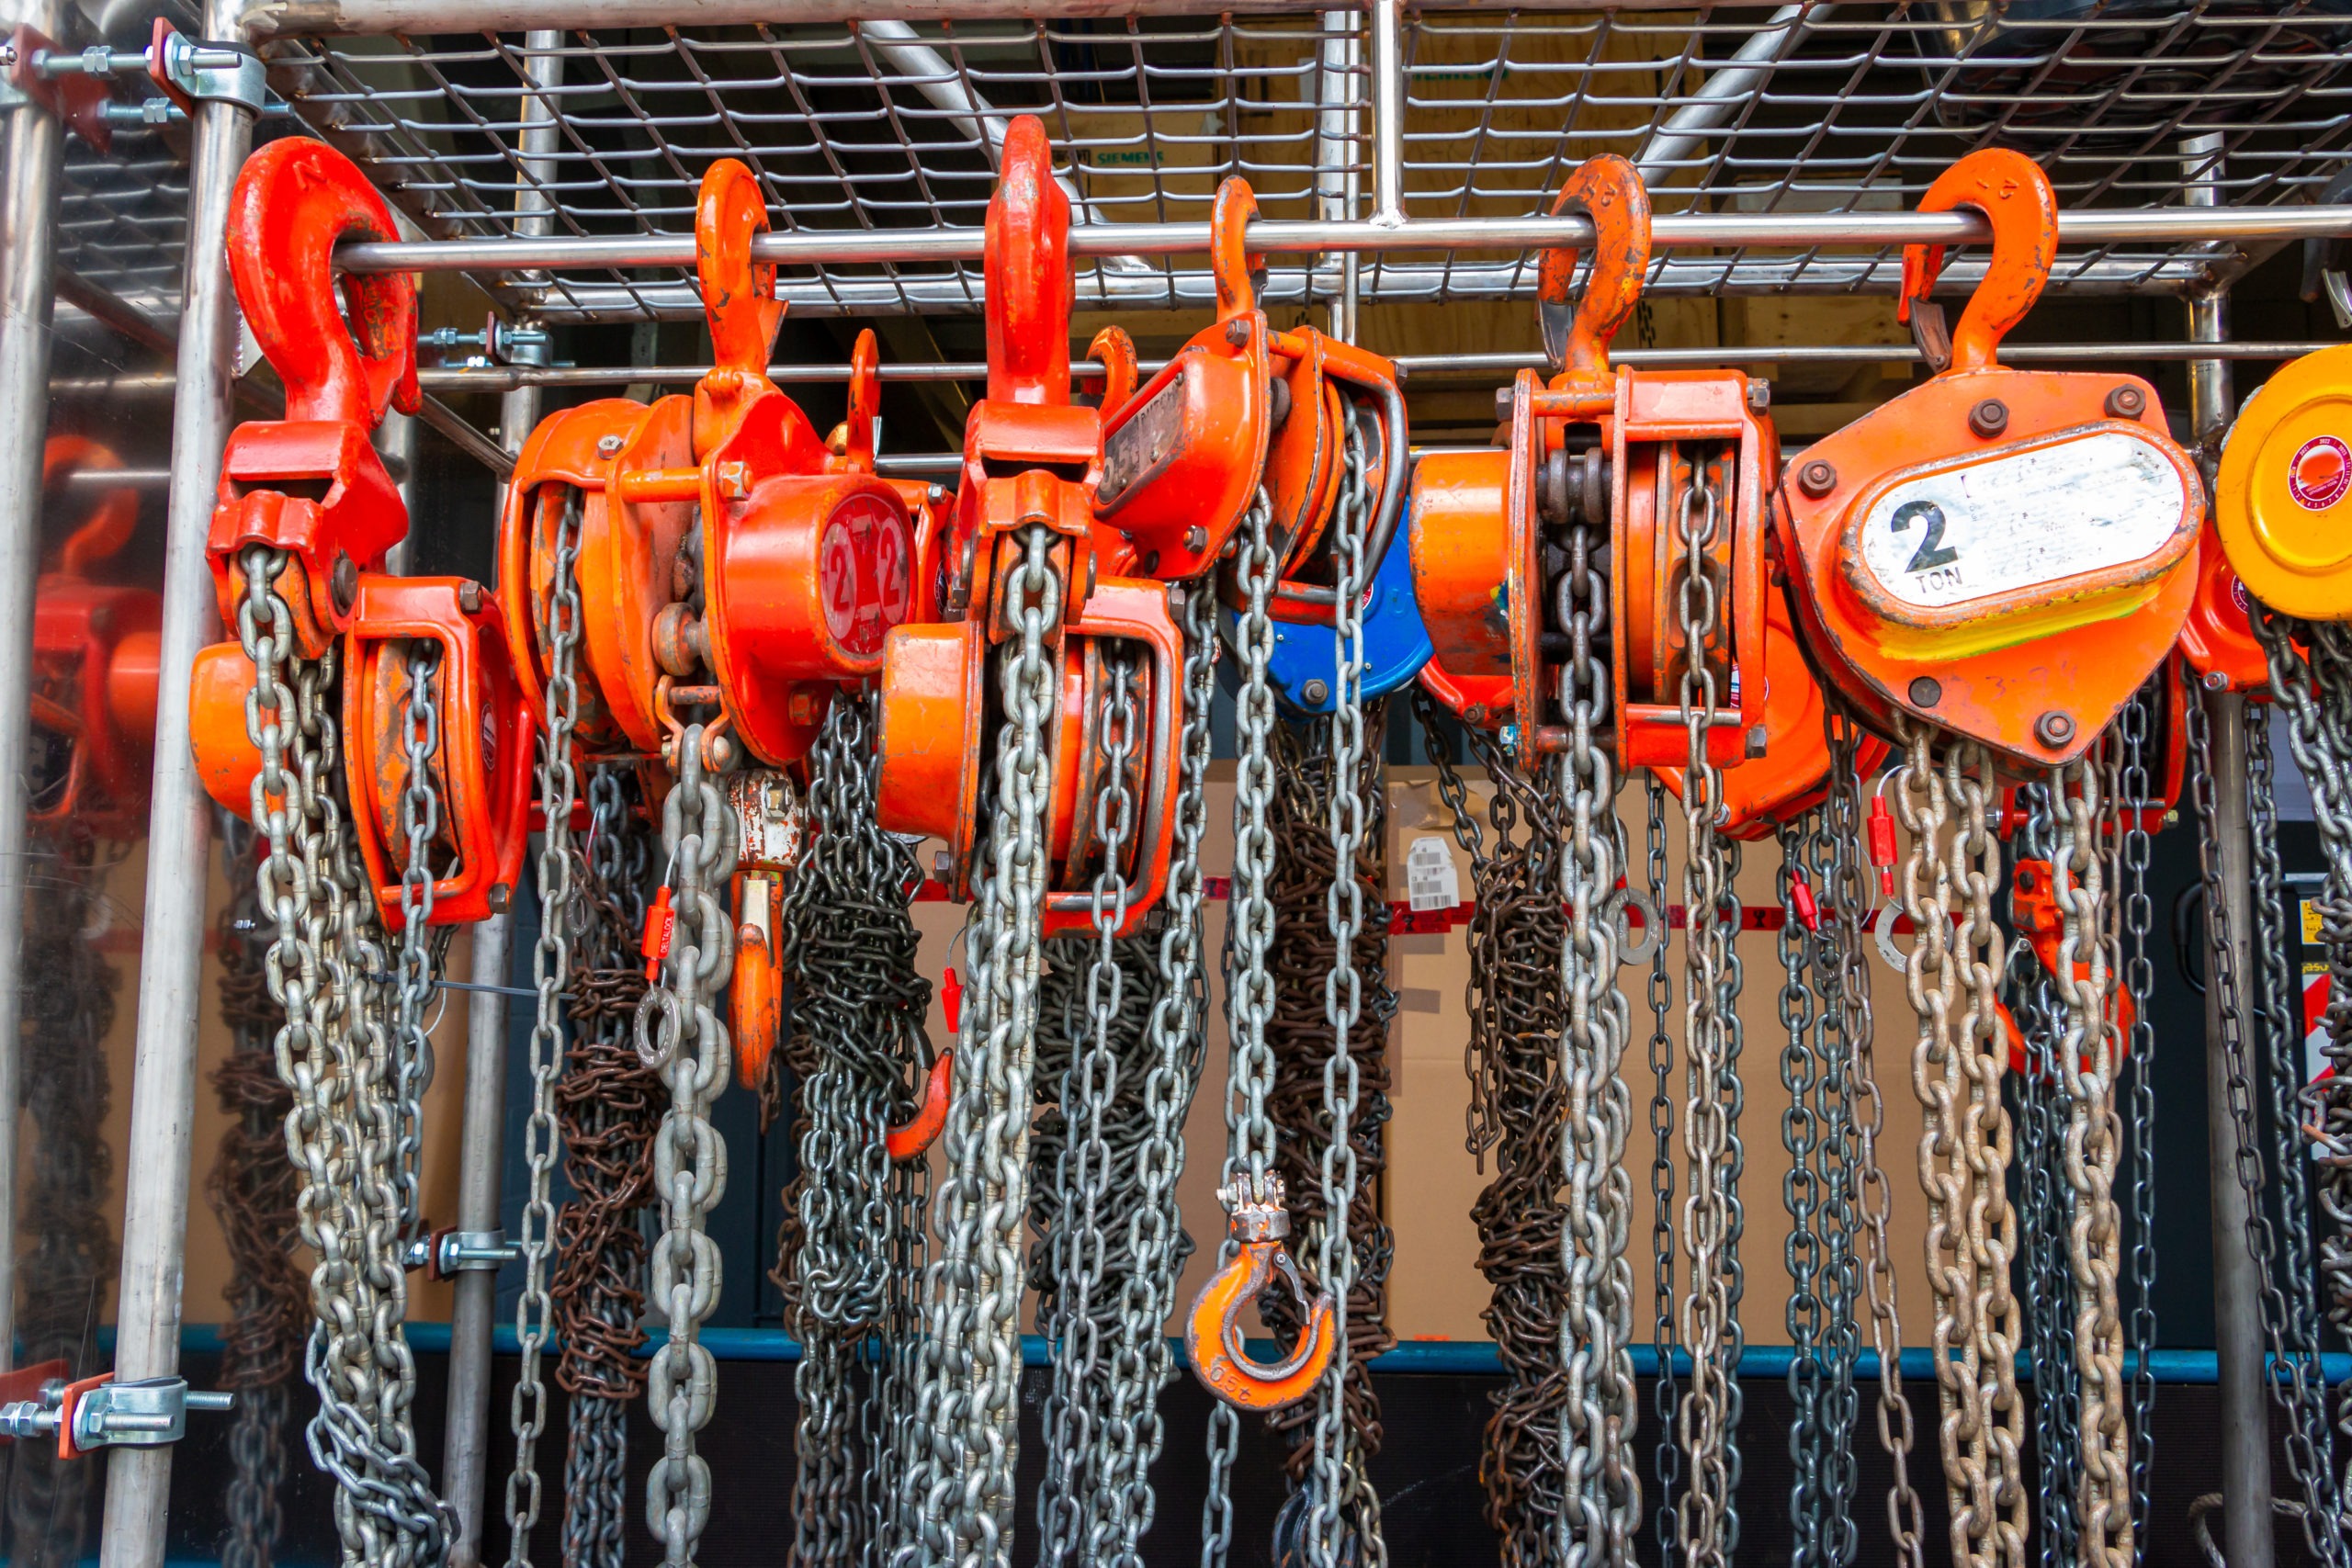 Multiple chain hoists hanging in a rack ready for use in a indus